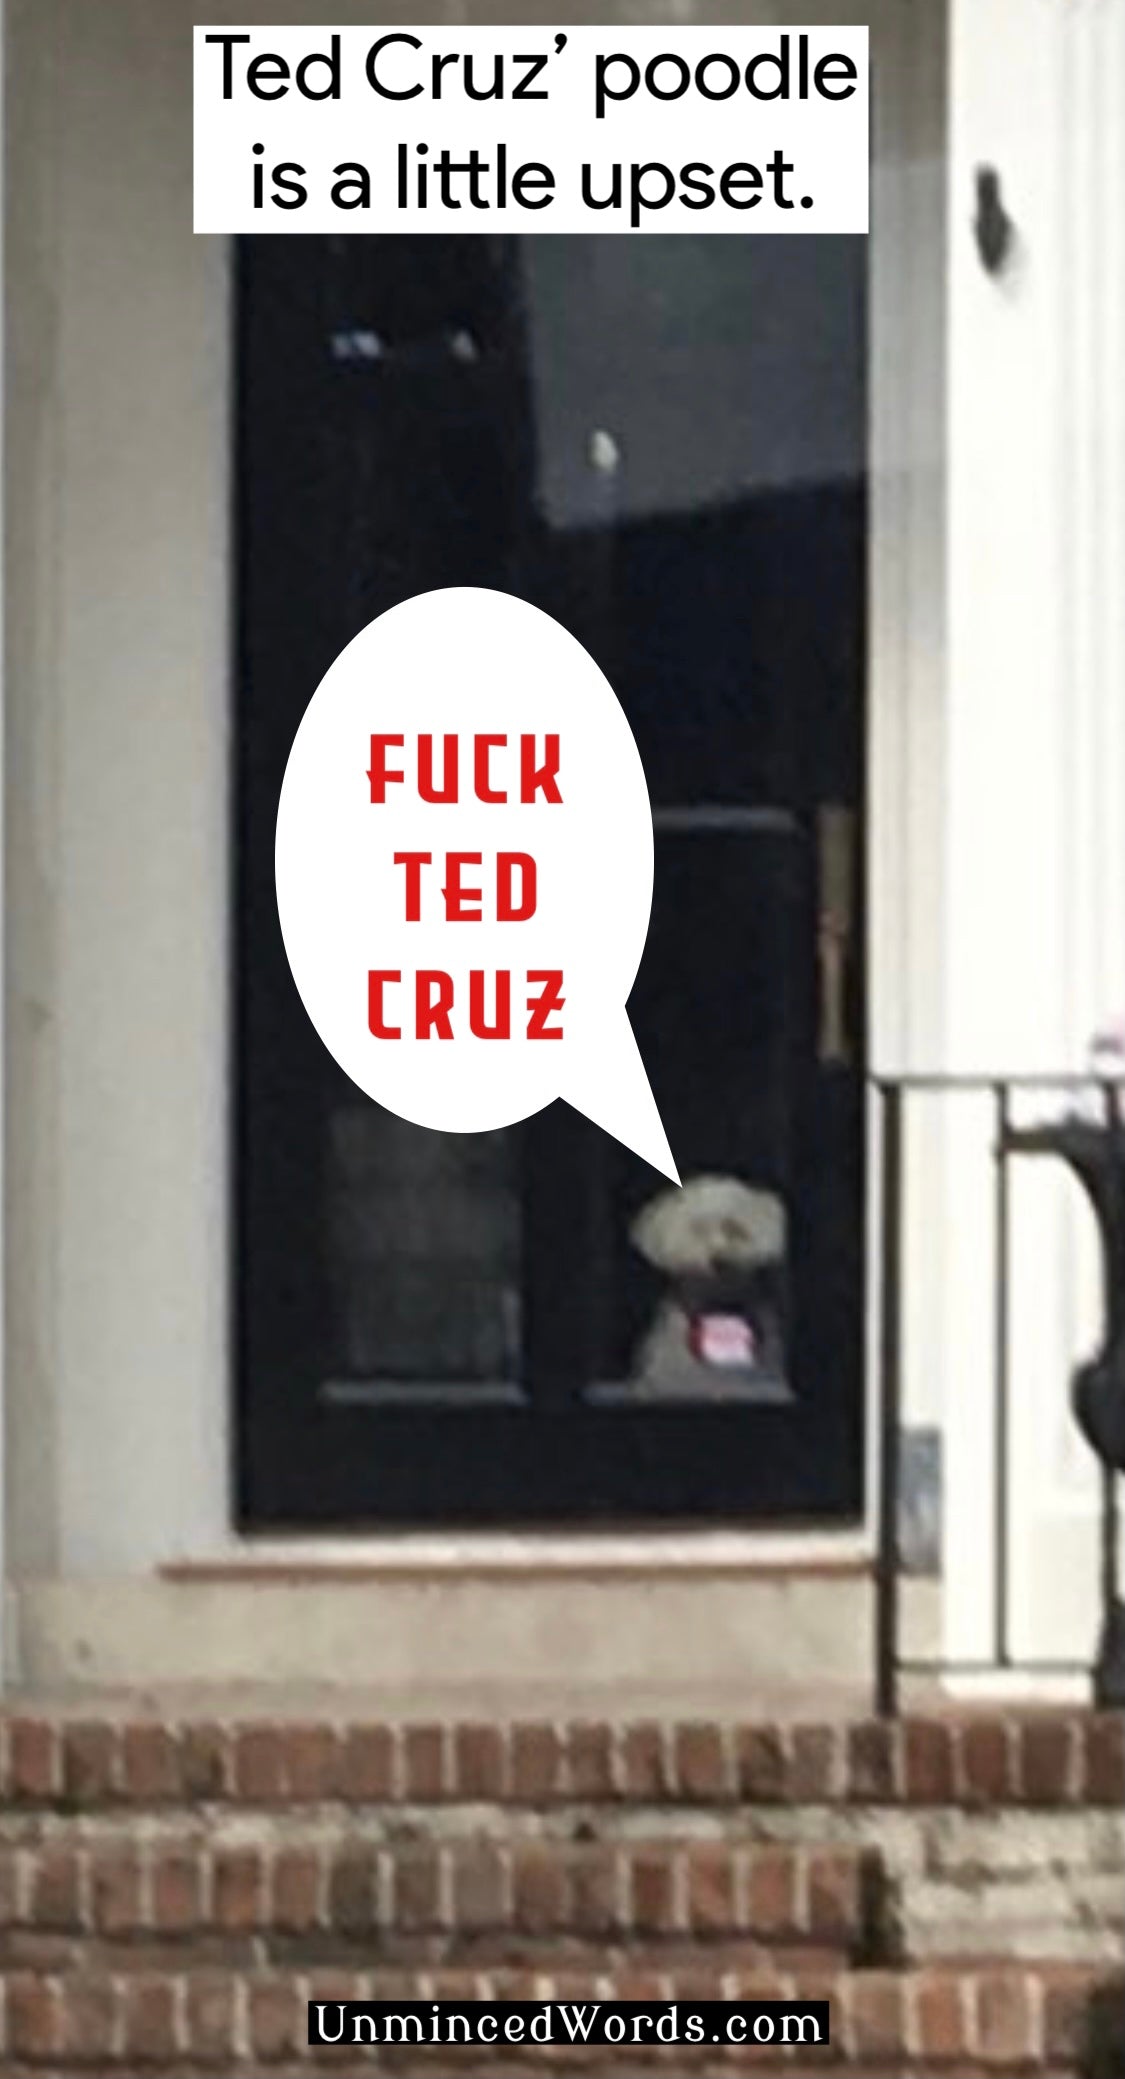 Ted Cruz’ poodle is a little upset.